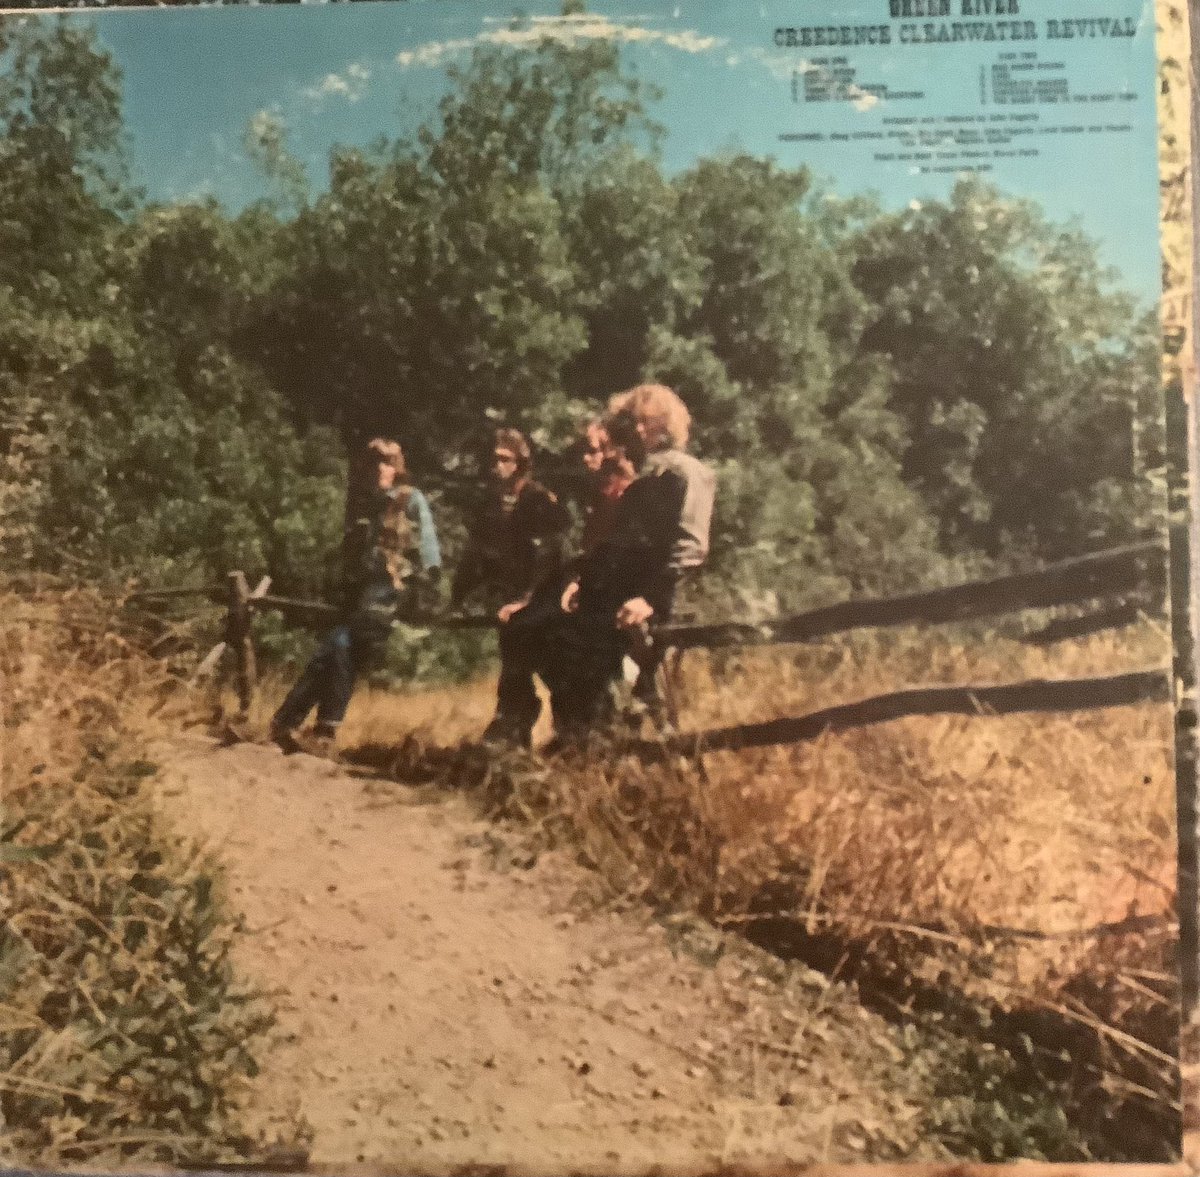 LP #757 Creedence Clearwater Revival - Green River, 1969. With the title song, Bad Moon Rising and Lodi #vinyl #recordsontheshelf